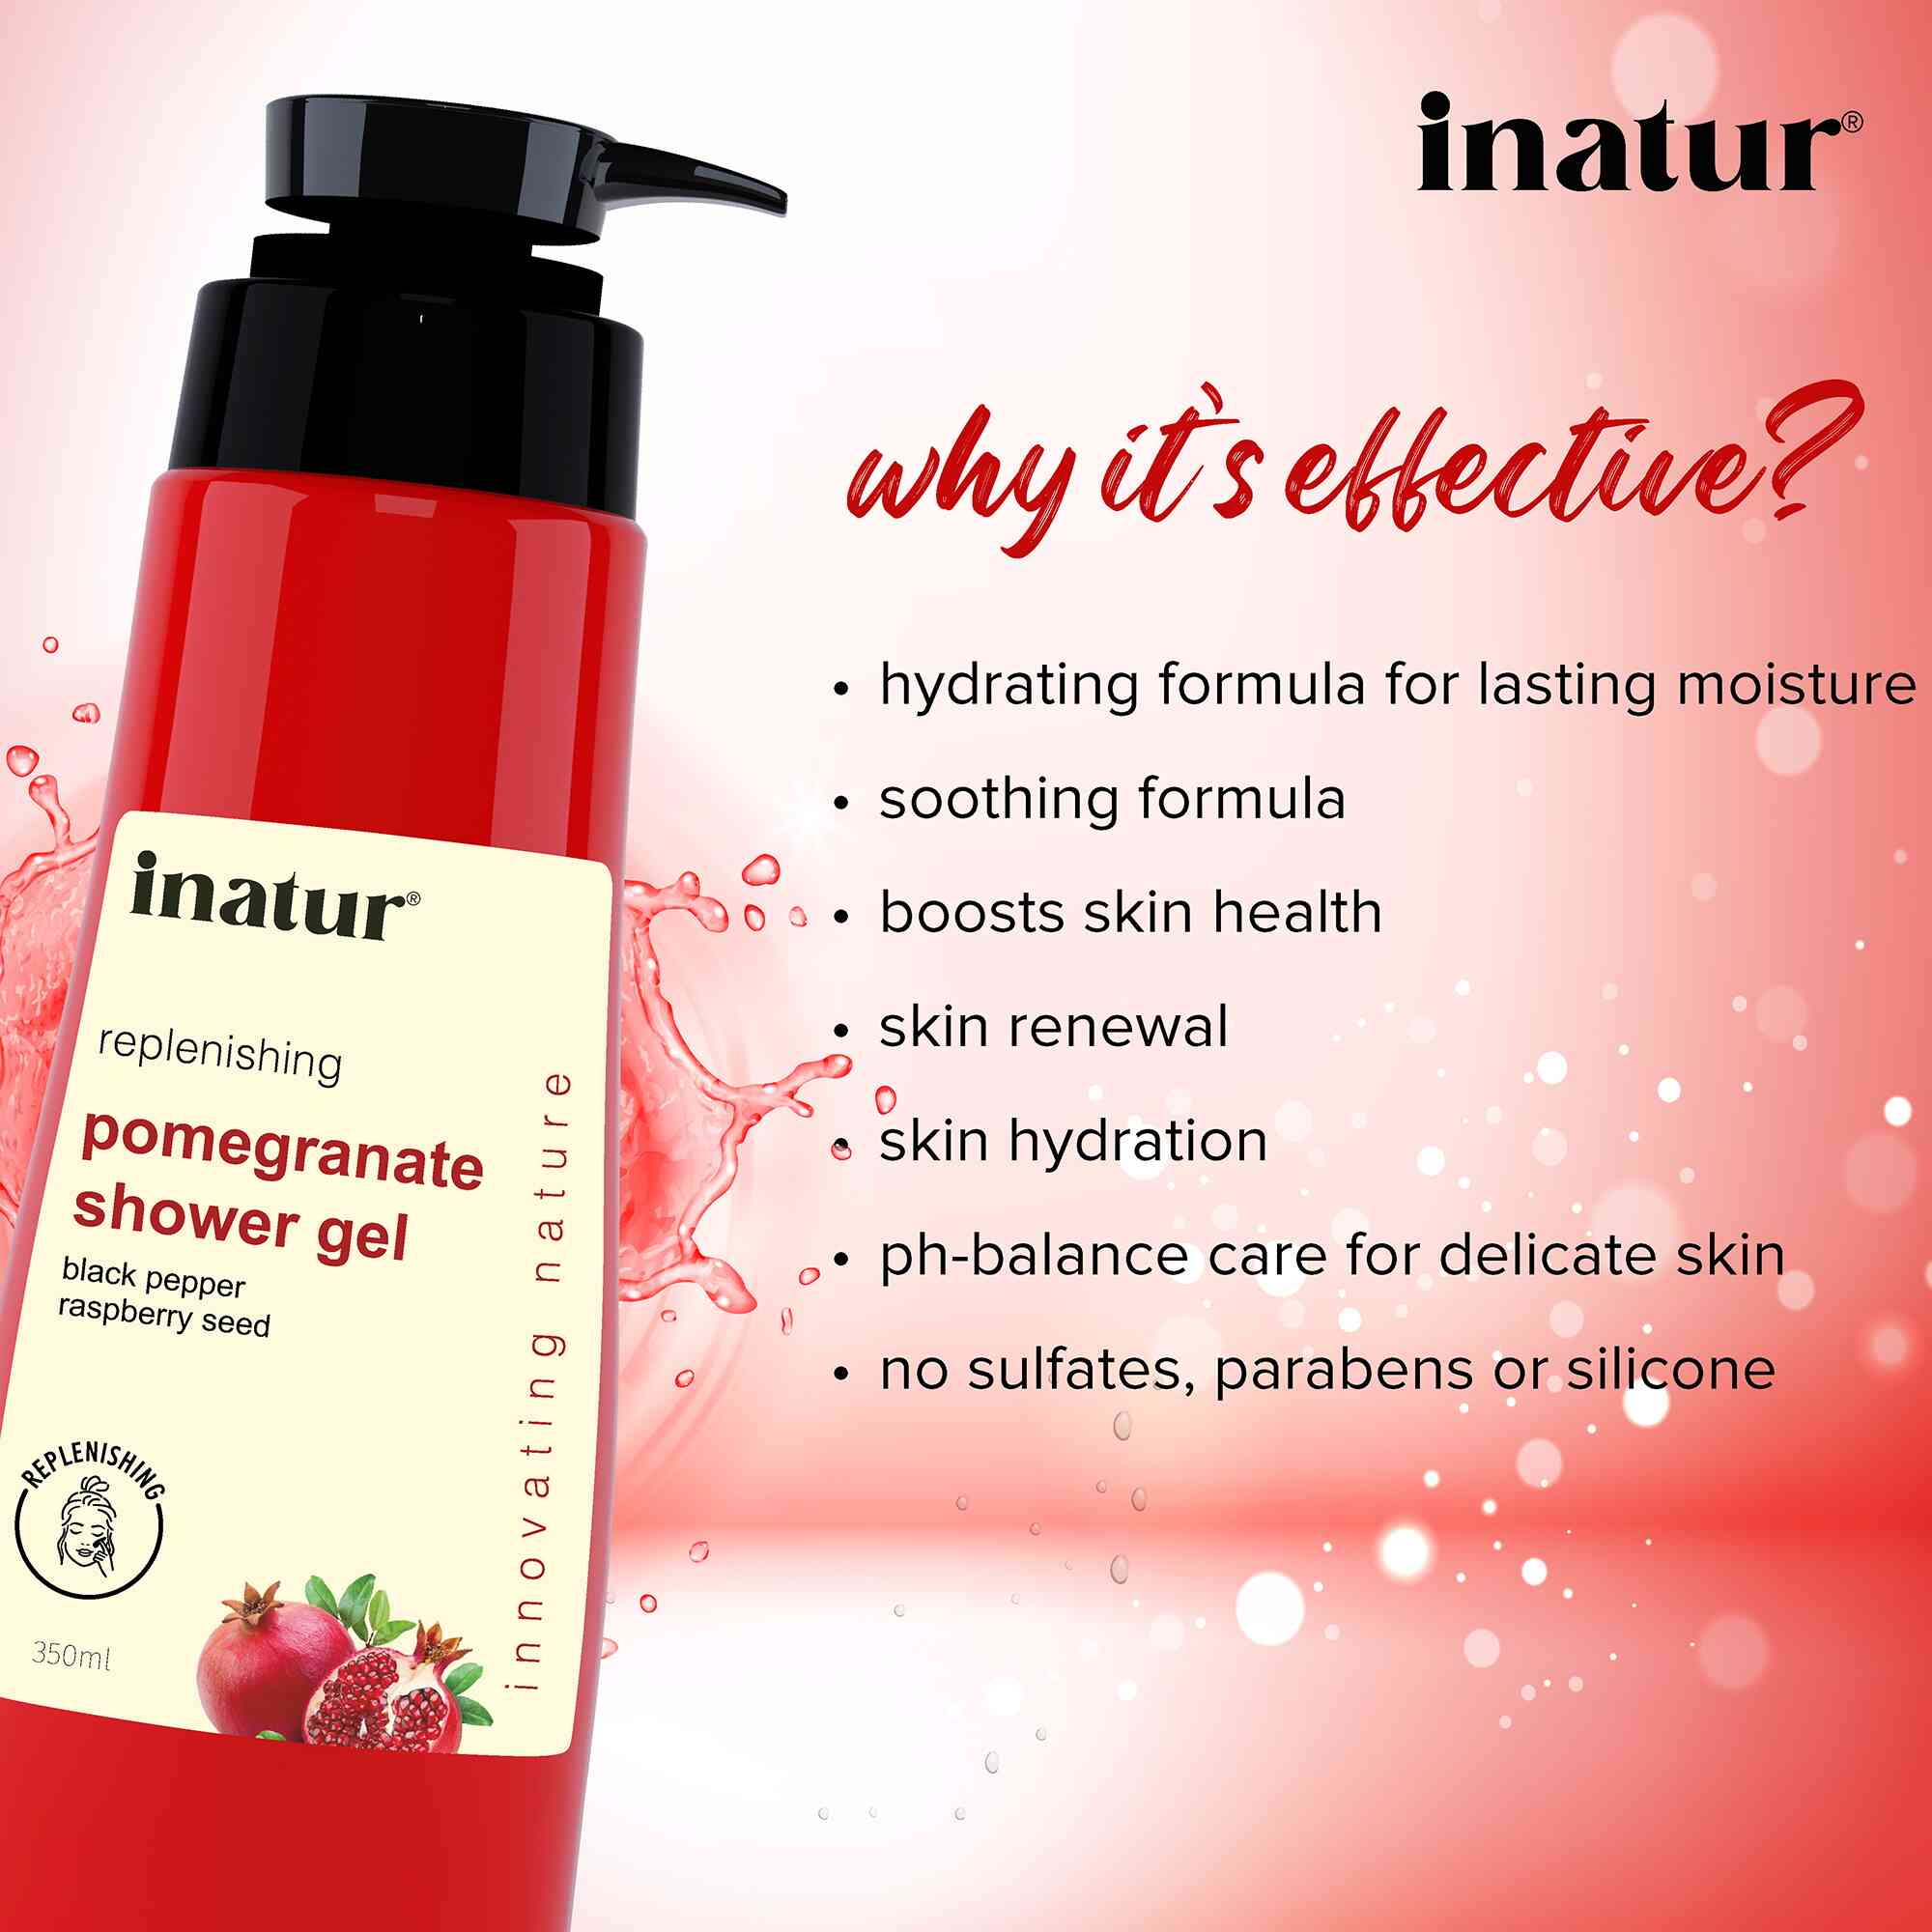 why inatur pomegranate shower gel is effective